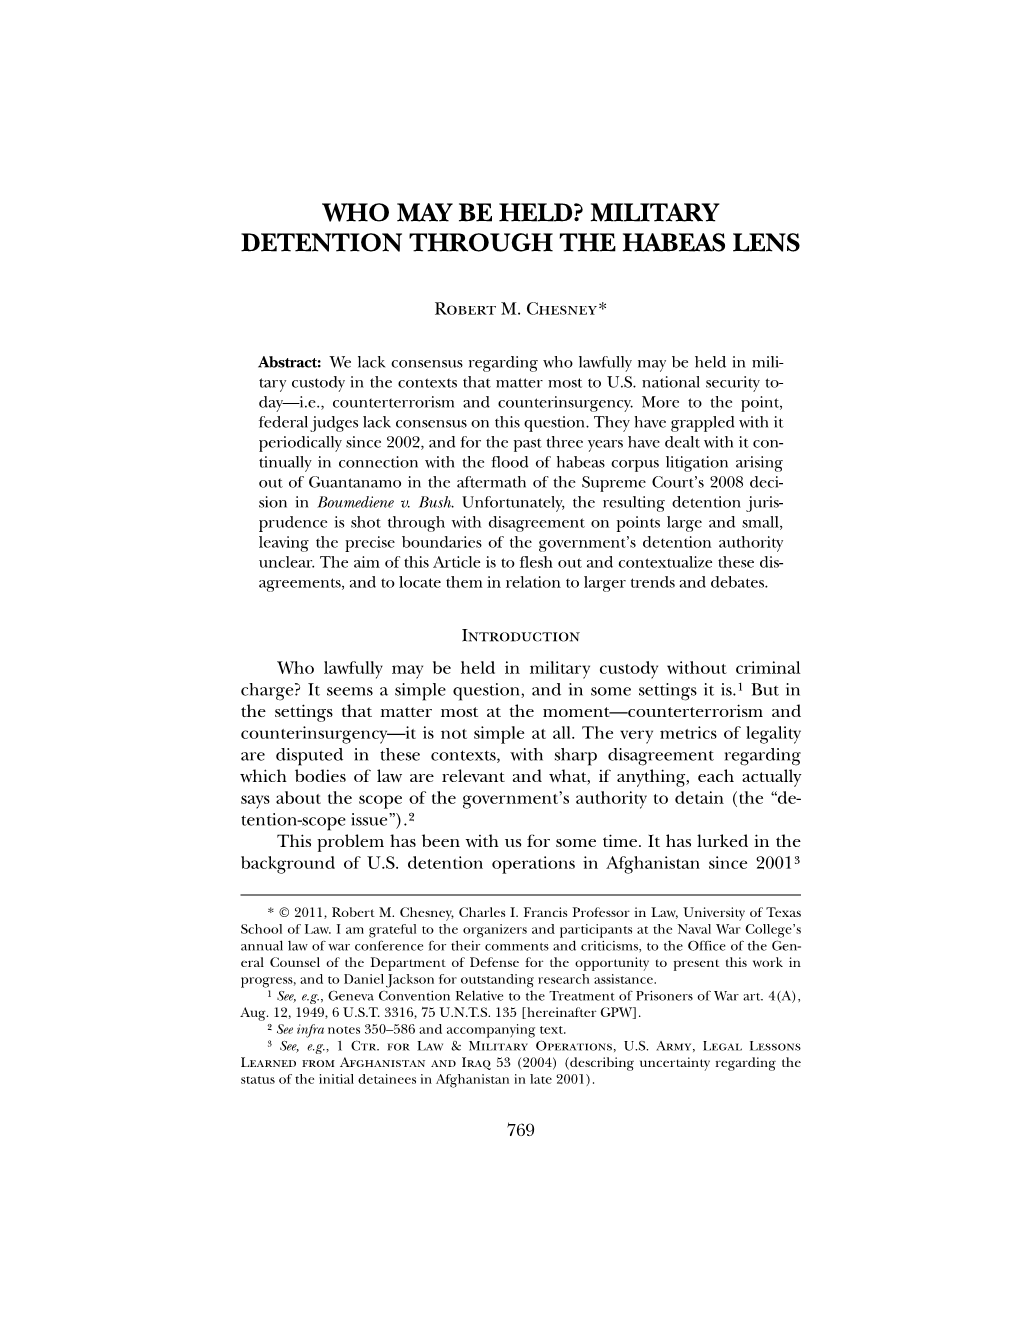 Military Detentions Through the Habeas Lens